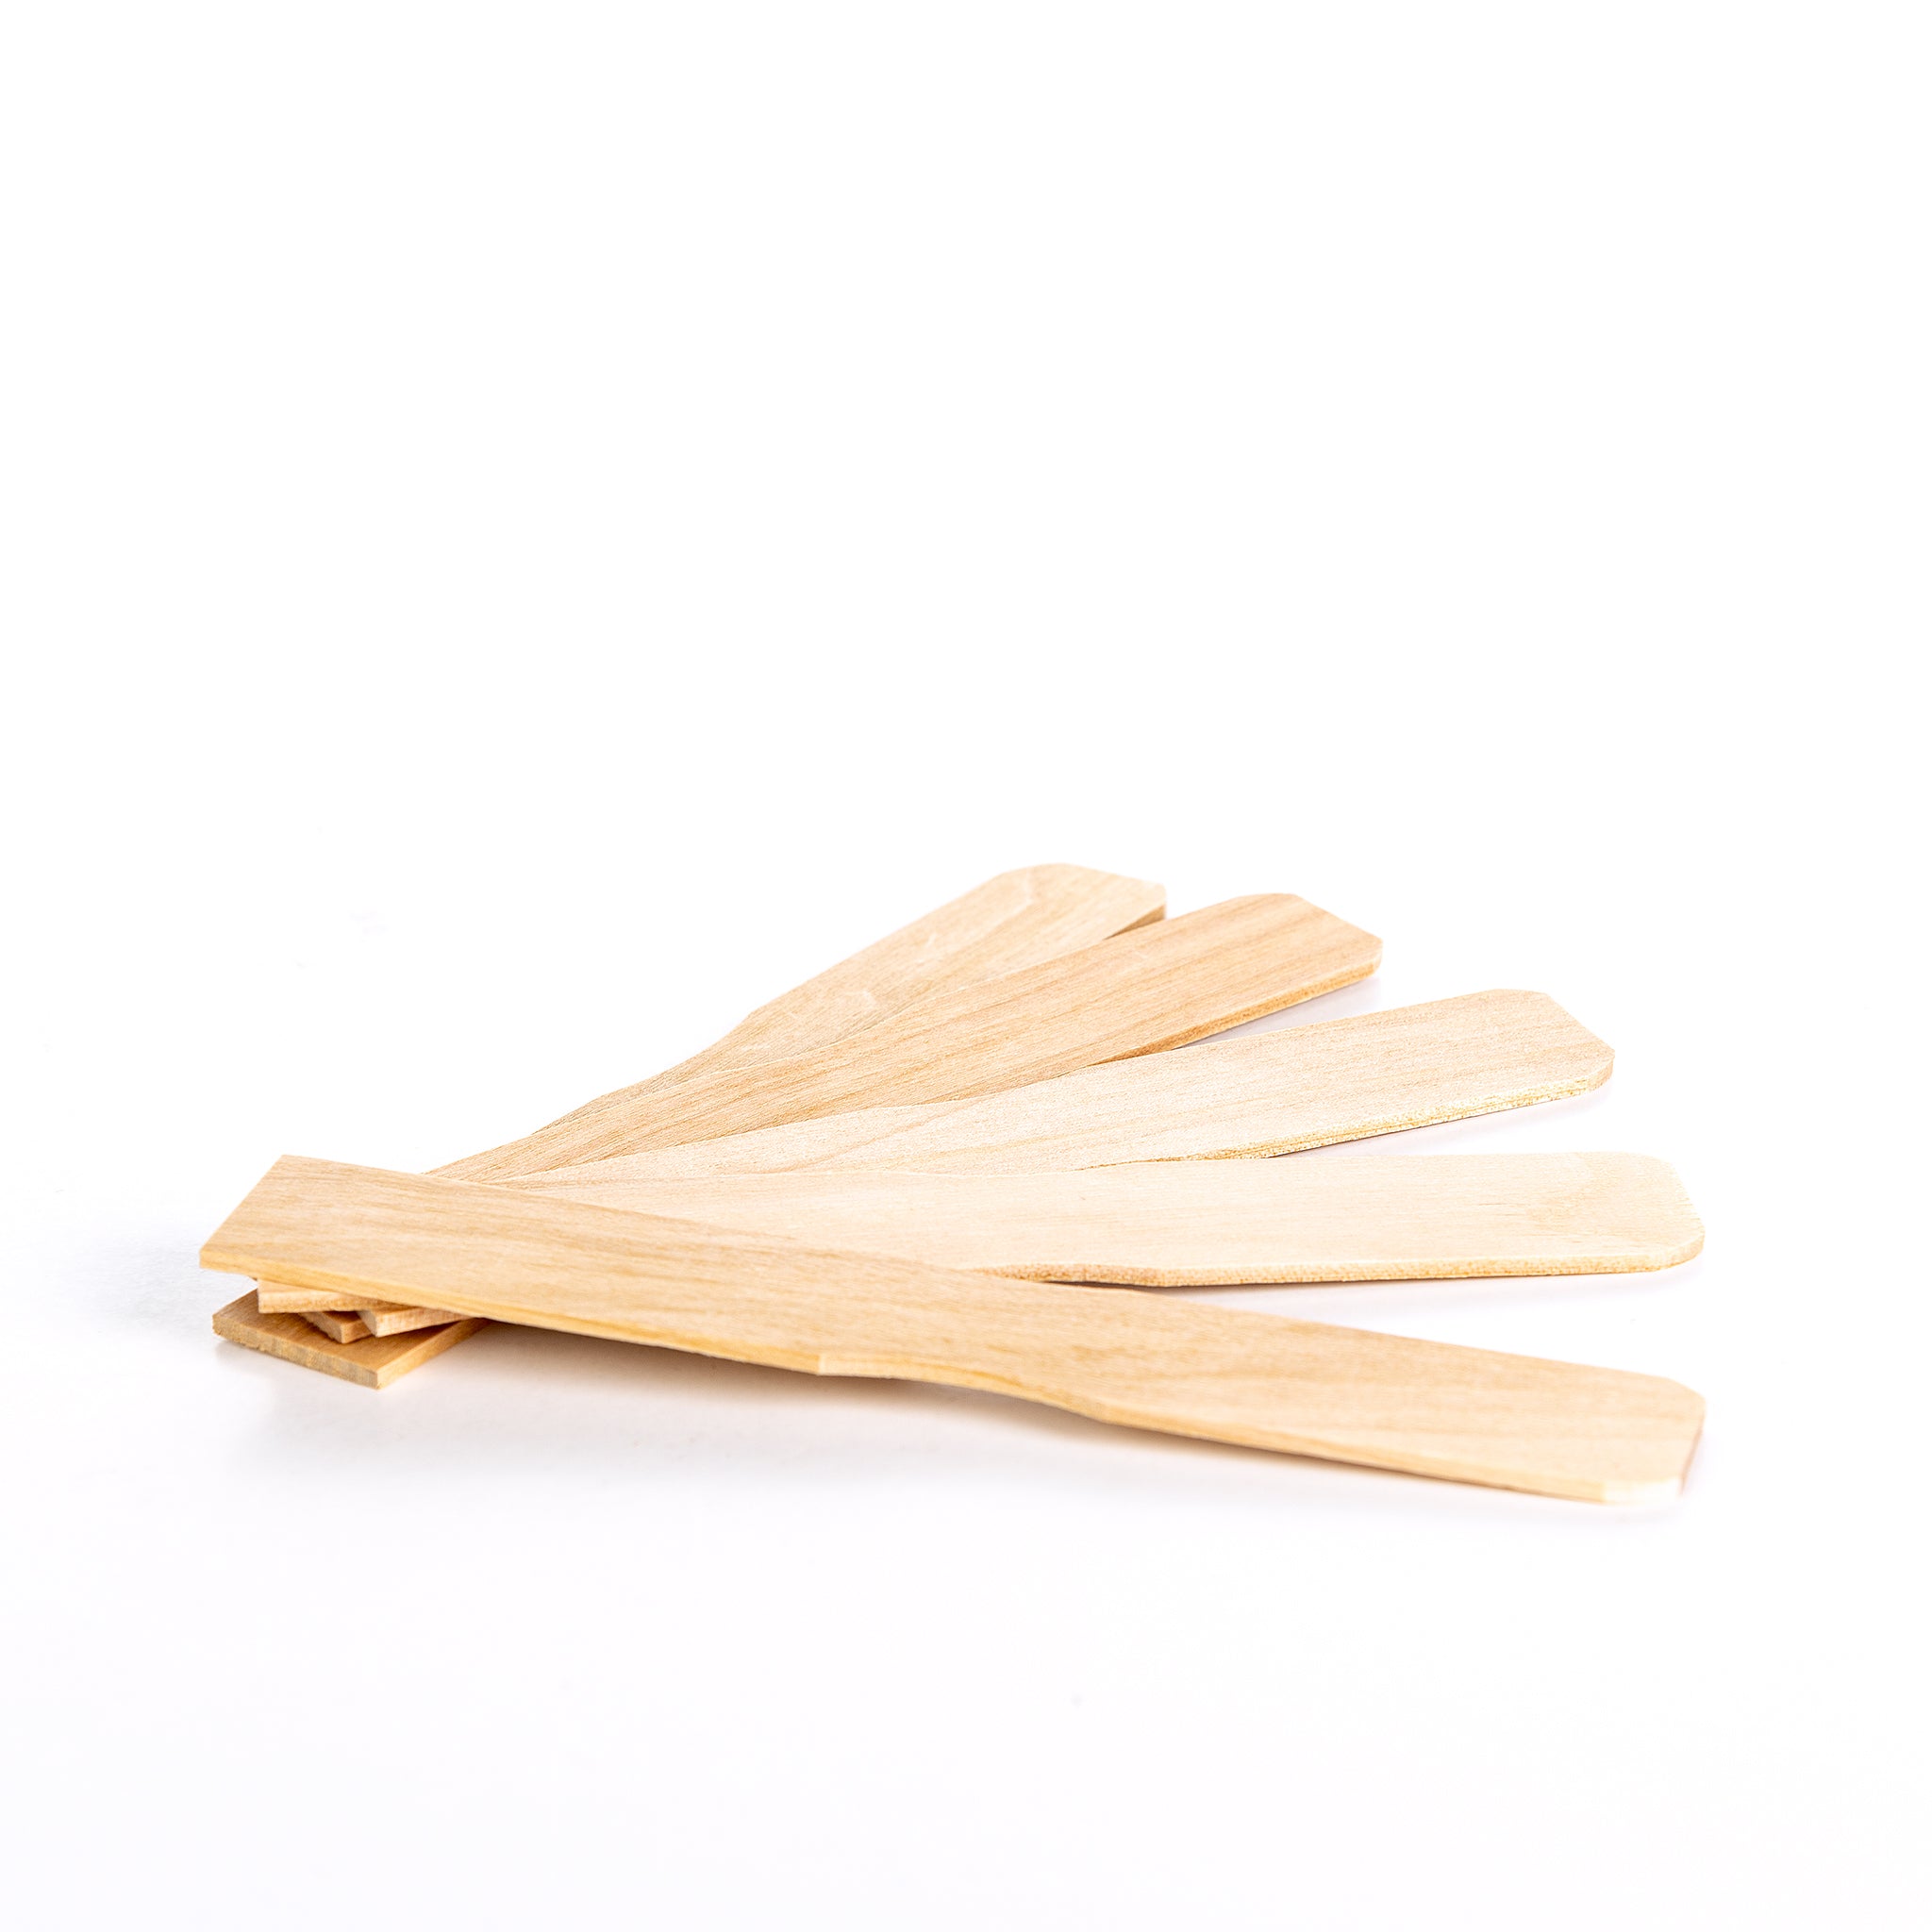 WoodU Wooden Paint Paddle Sticks All Natural Eco-friendly Non-toxic